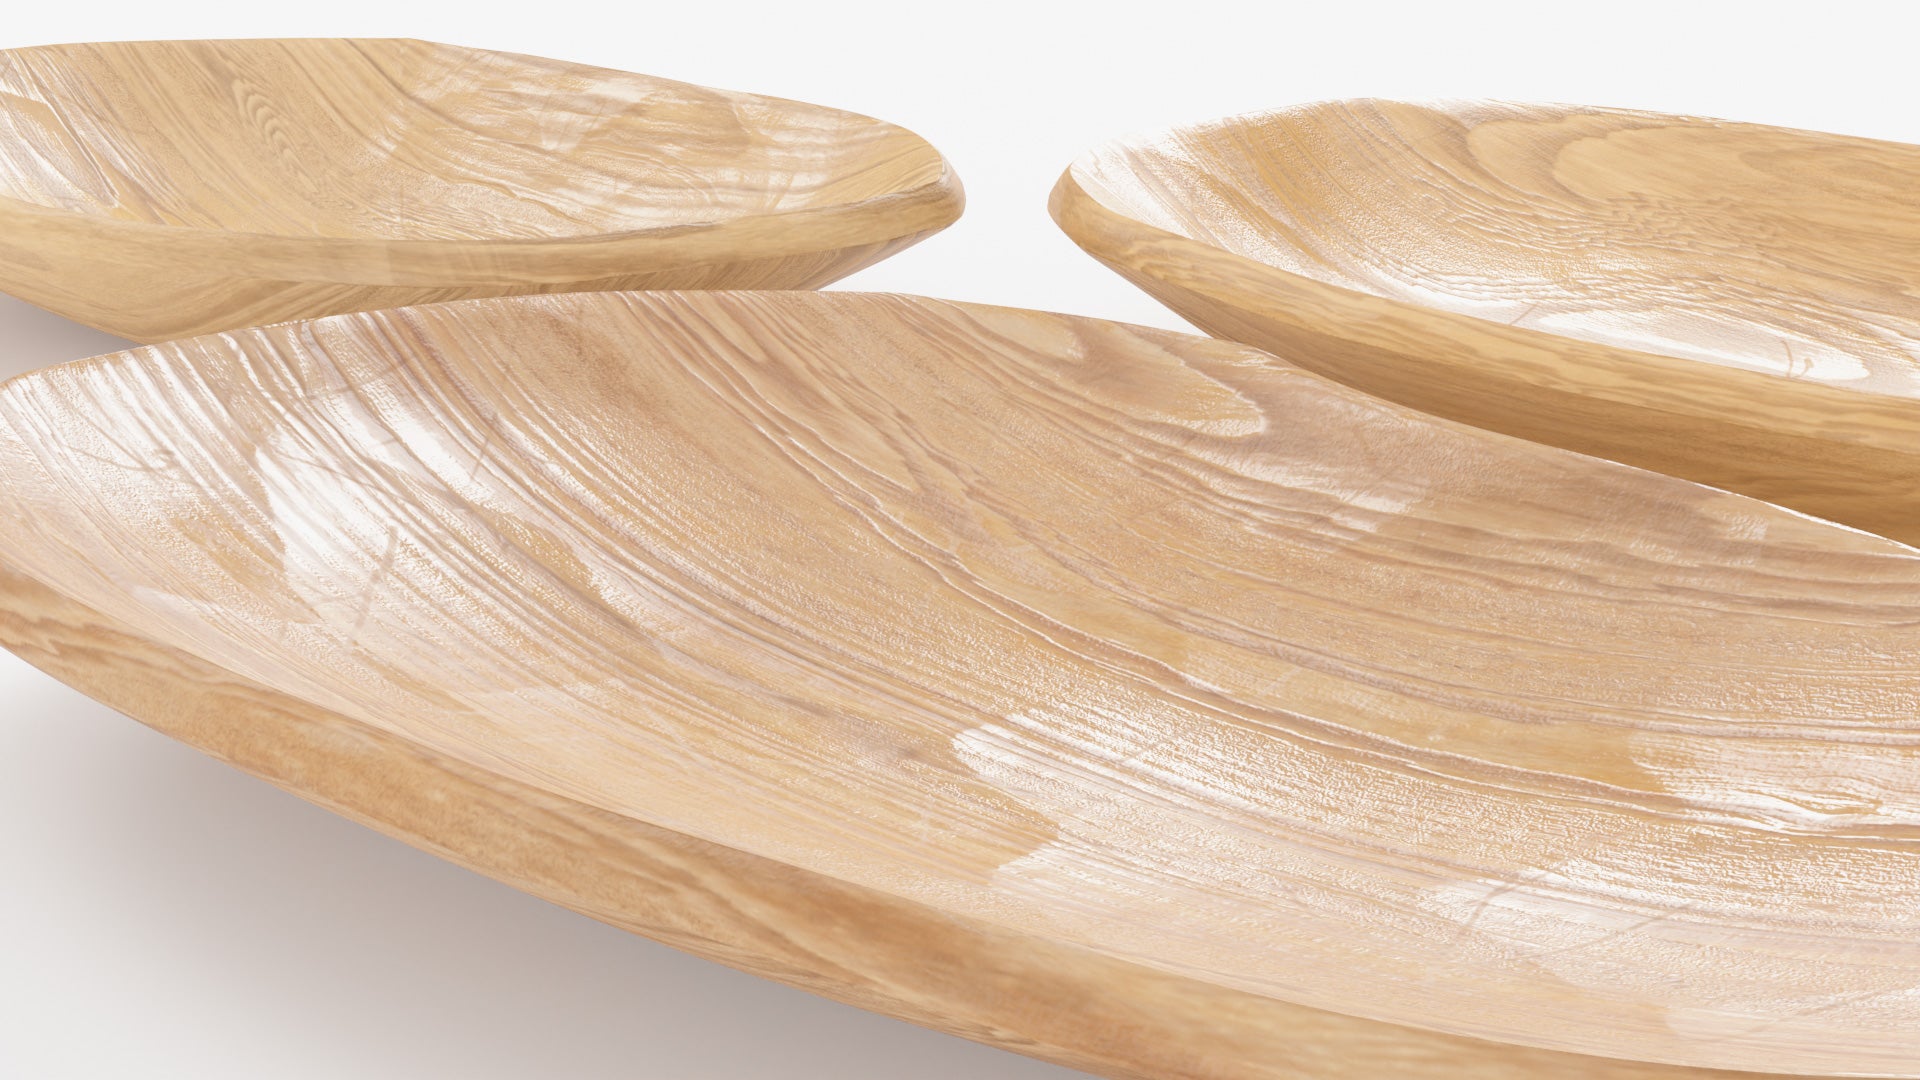 Closeup of a 3D model of three asymmetrical plates that seem to be hand-carved, stacked on top of another. The models have low polycount, and PBR materials, so they look very realistic